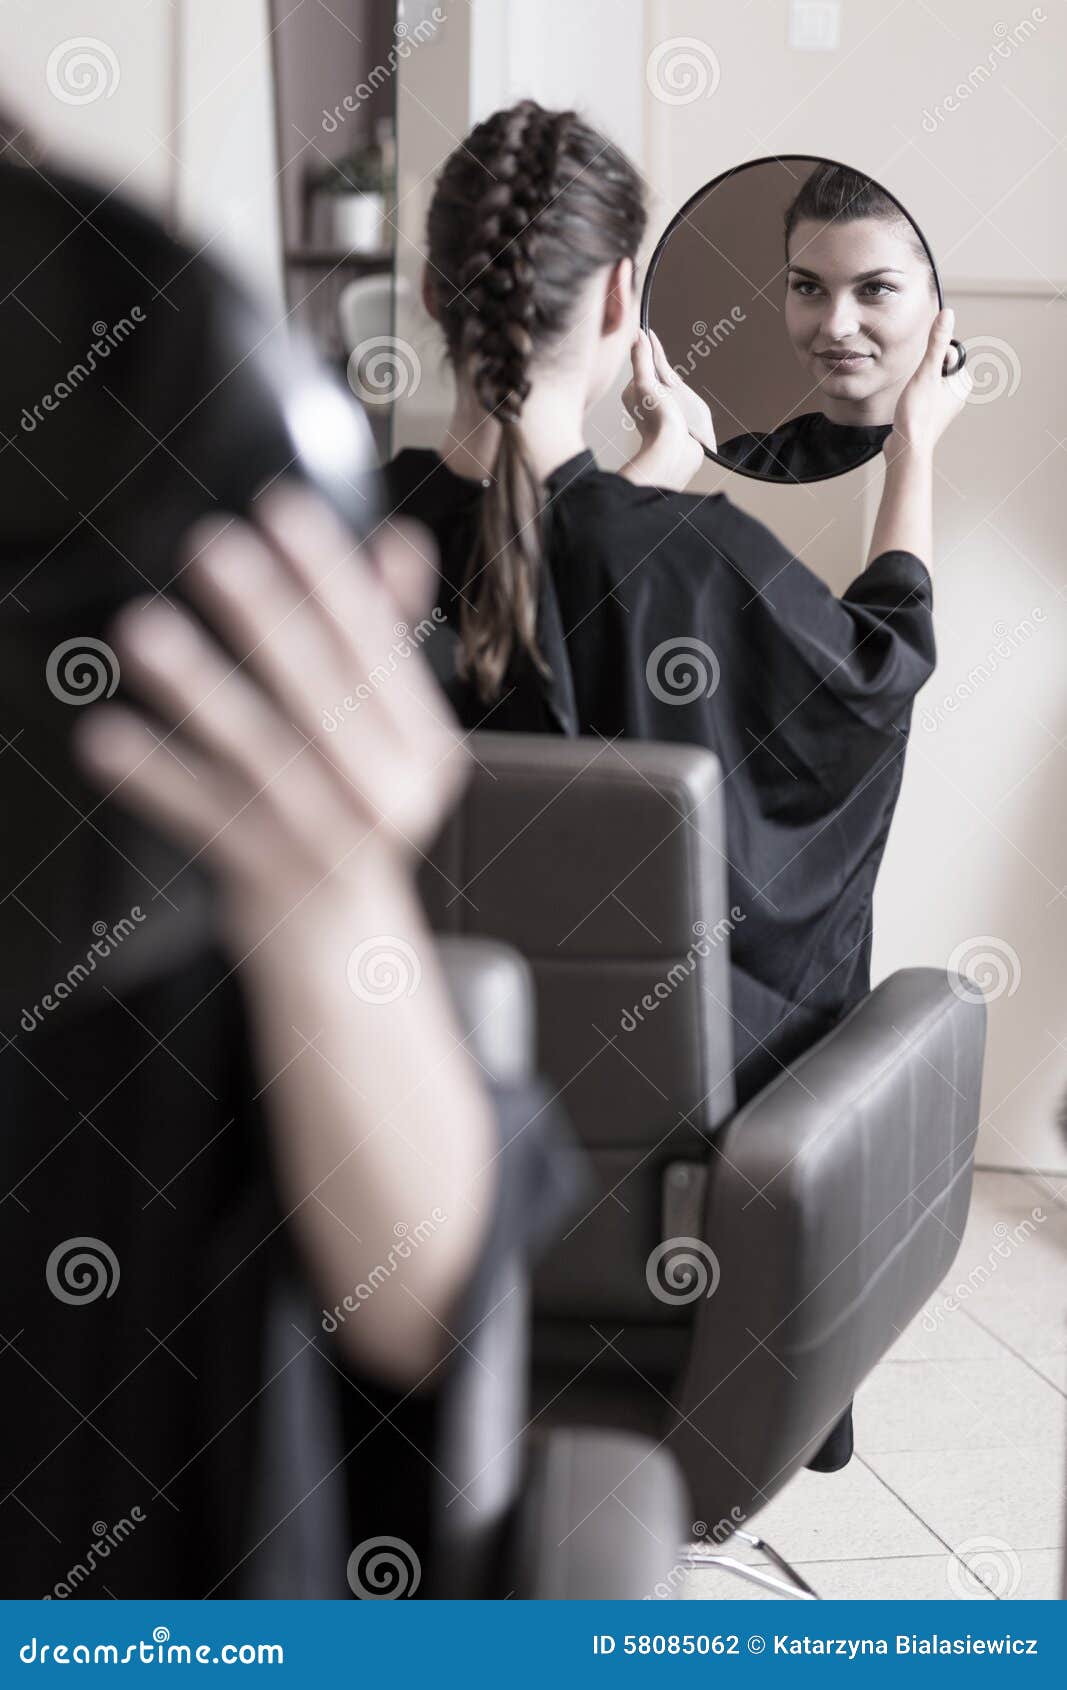 Woman admiring new hairstyle in the mirror